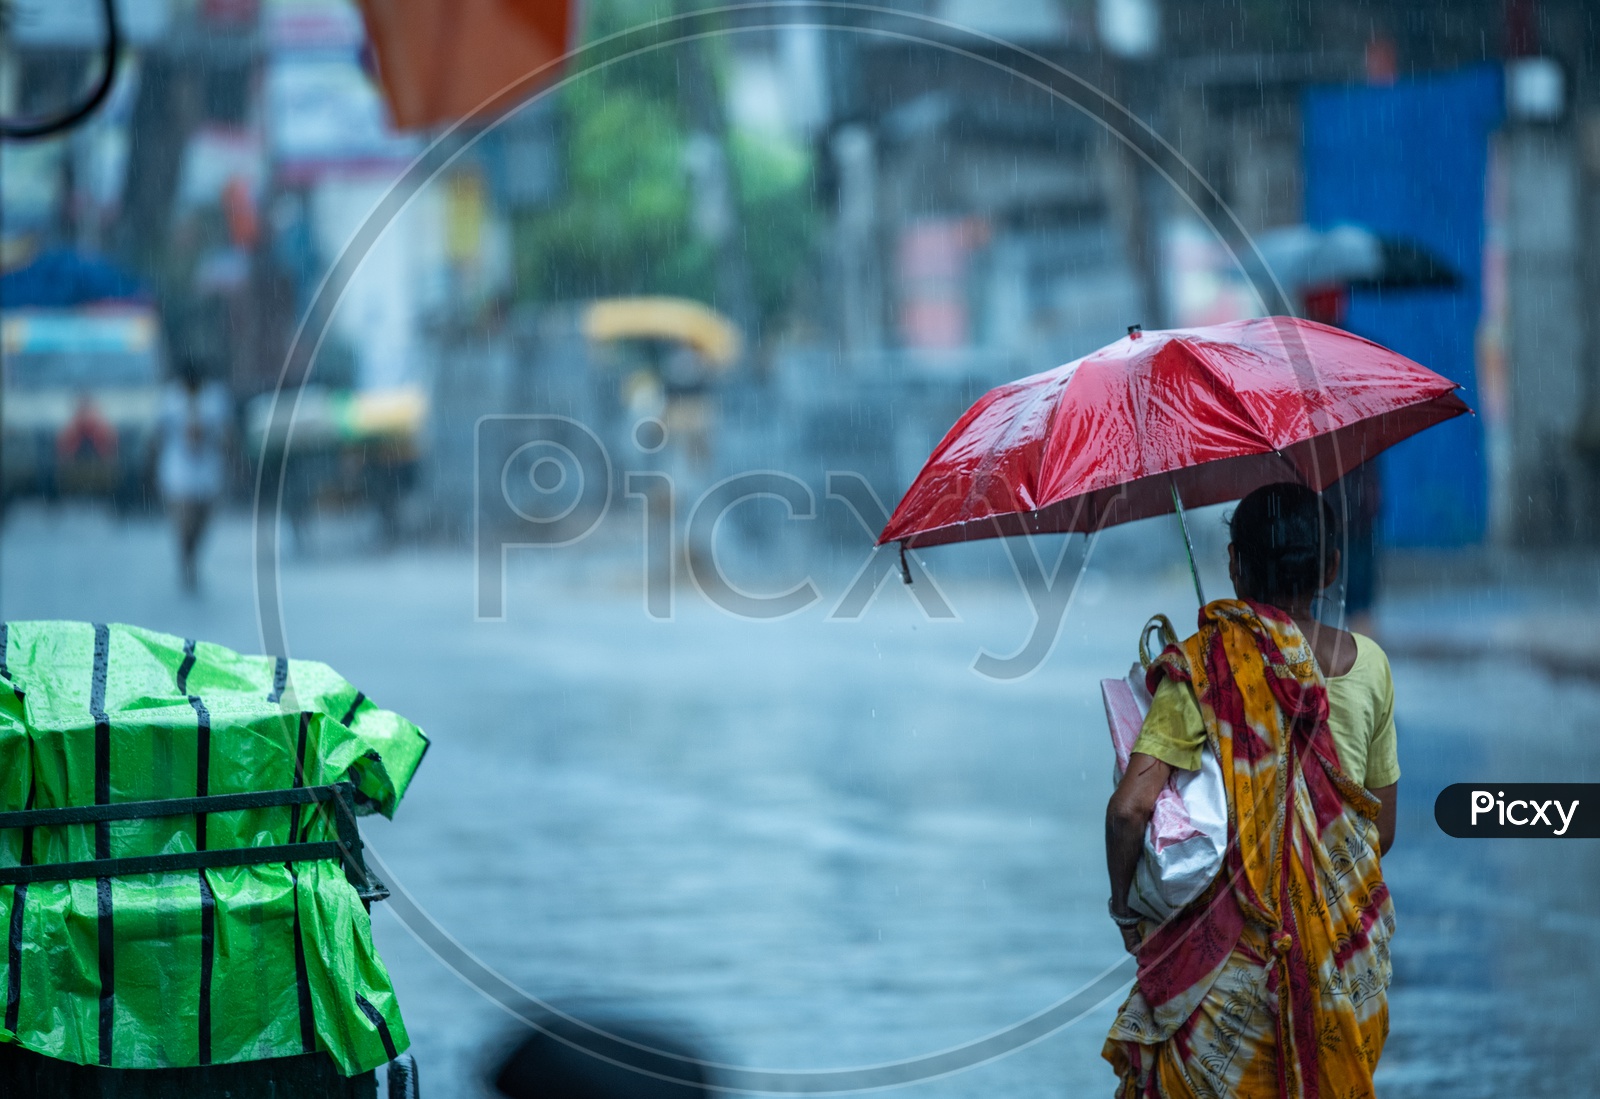 A Woman  Pedestrians  Holding  umbrellas And Taking Cover from Heavy  Rain  Duer To Cyclone Fani  on  Howrah  Roads